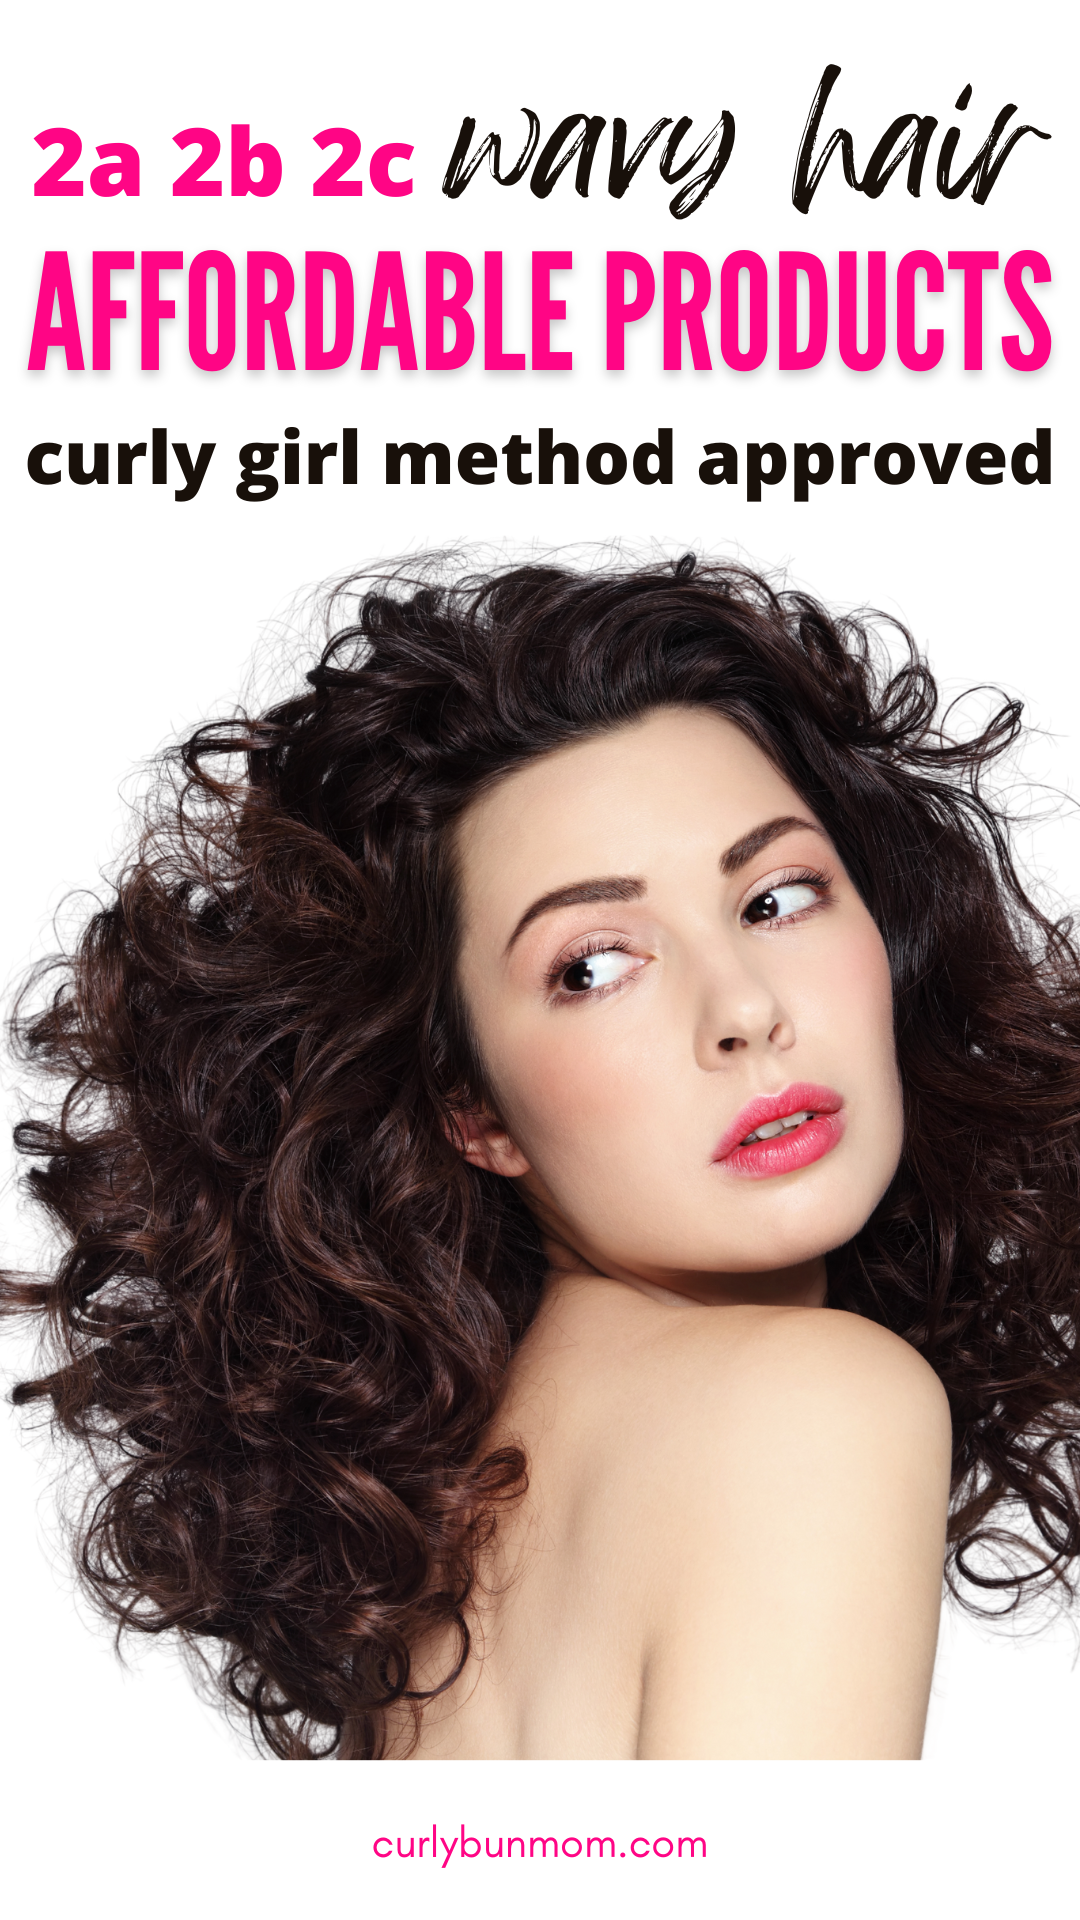 25 Best Products For 2a 2b 2c Hair Affordable Curly Girl Wavy Products For 2024 Curly Bun Mom 0385